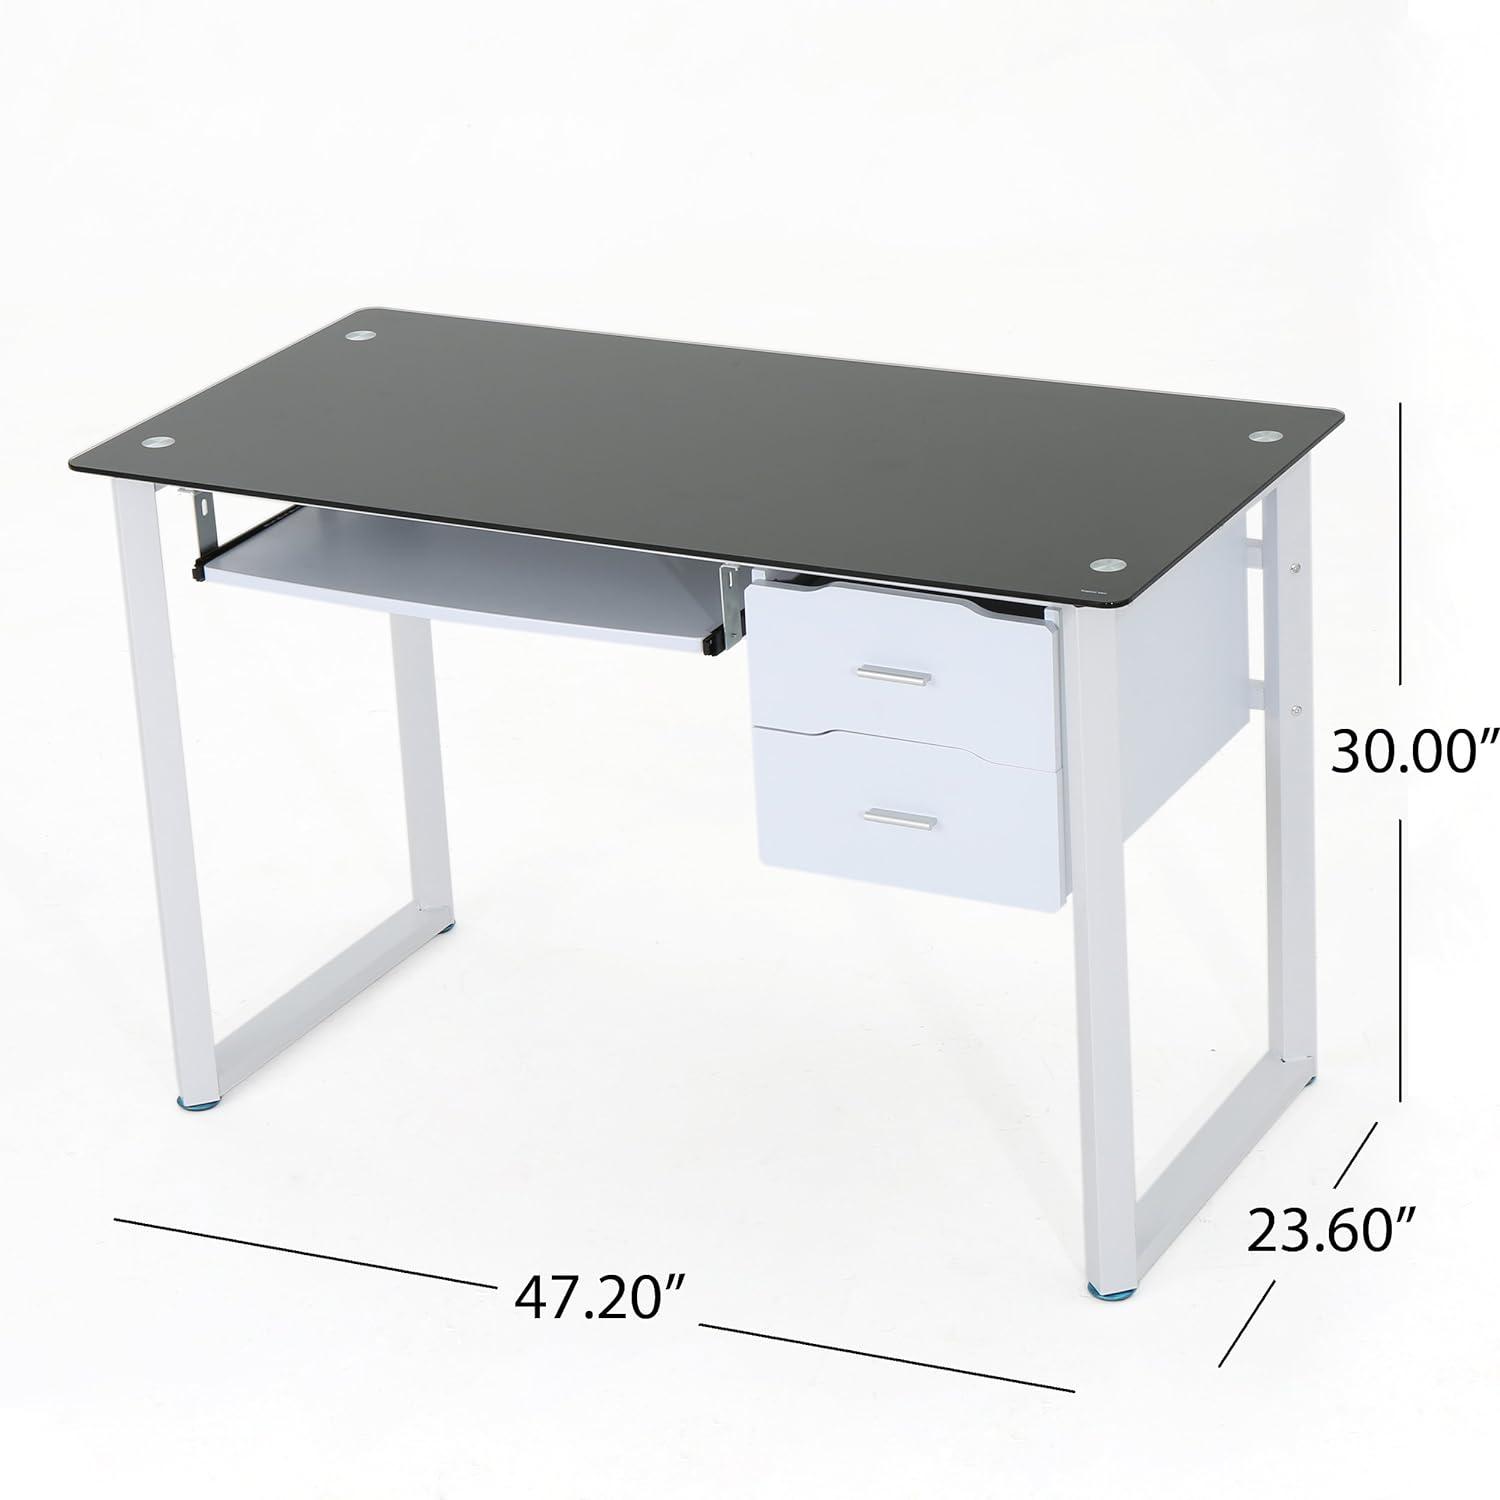 Sleek Black Tempered Glass Computer Desk with Keyboard Tray and Drawers